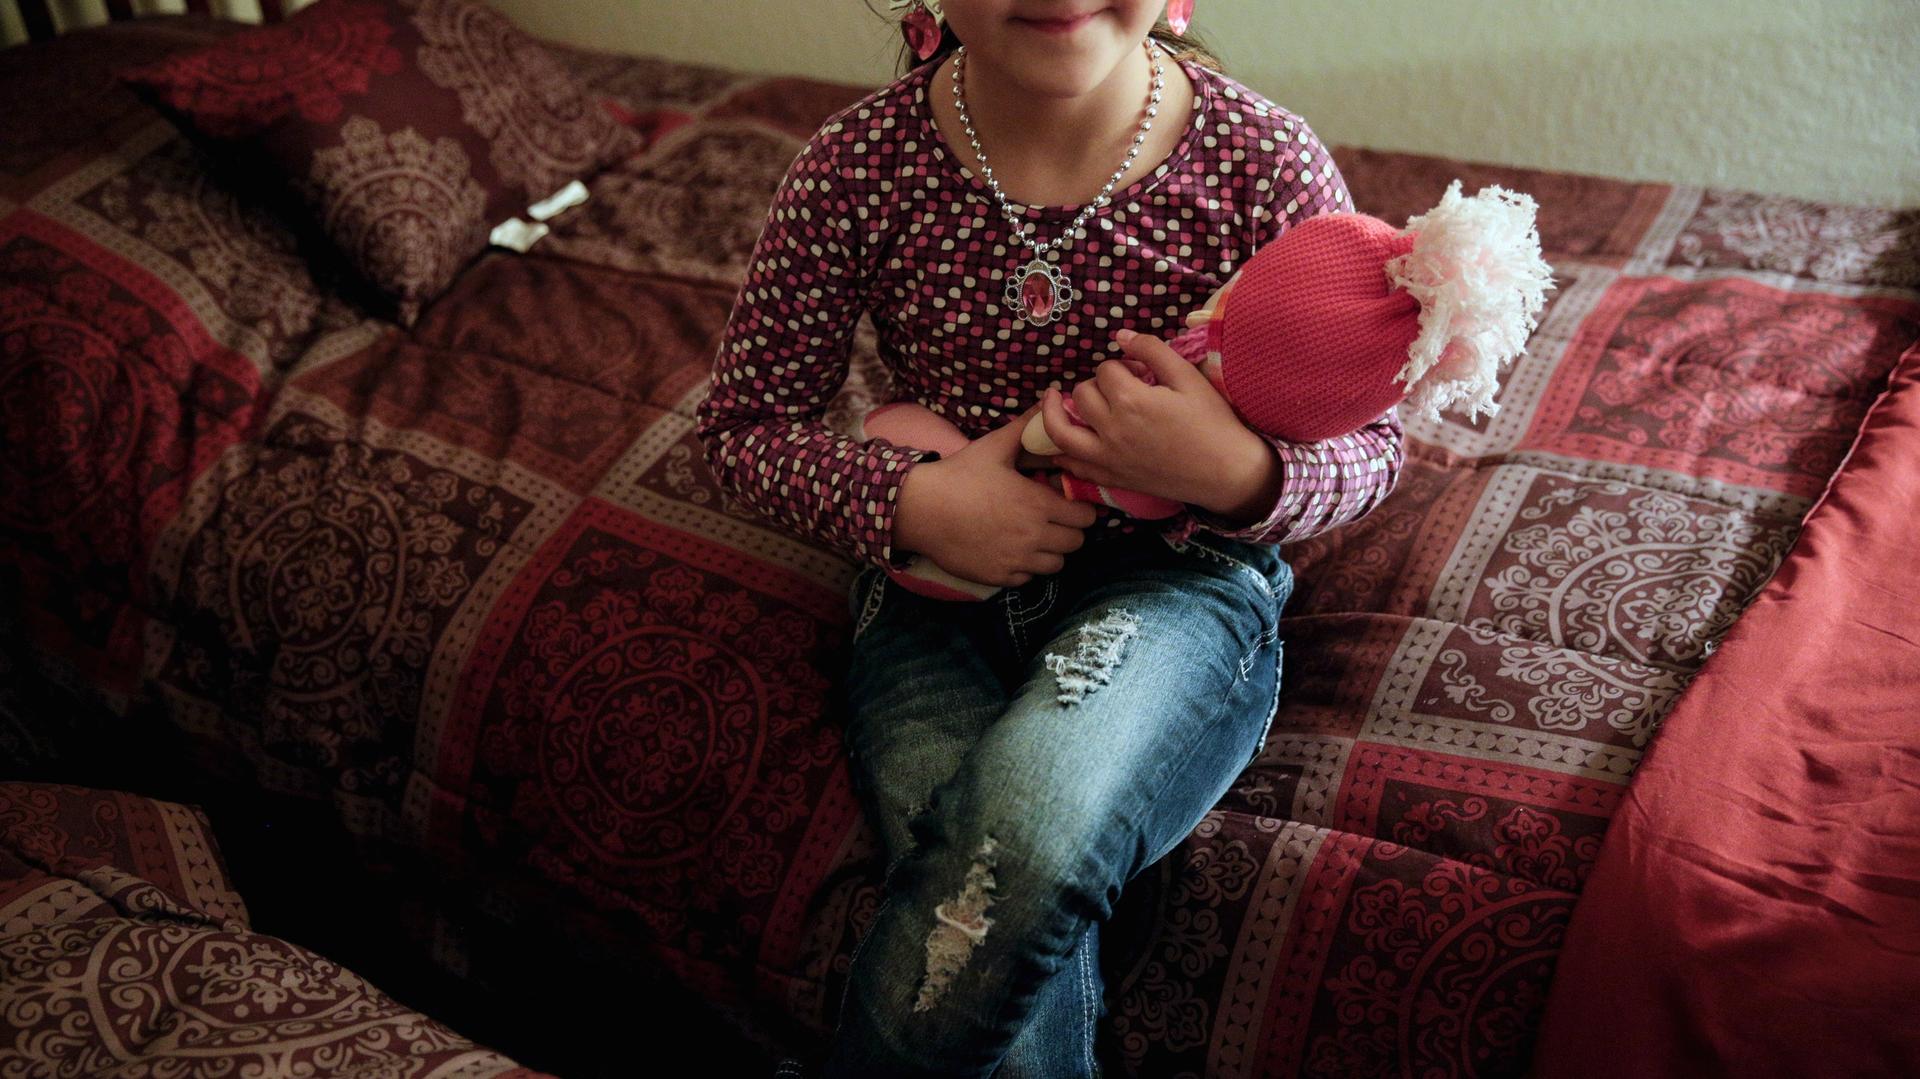 Five-year-old Leen, a Syrian refugee, poses for a portrait with her doll in her Sacramento, California bedroom on November 16, 2015. Her face is not being shown for security reasons. 